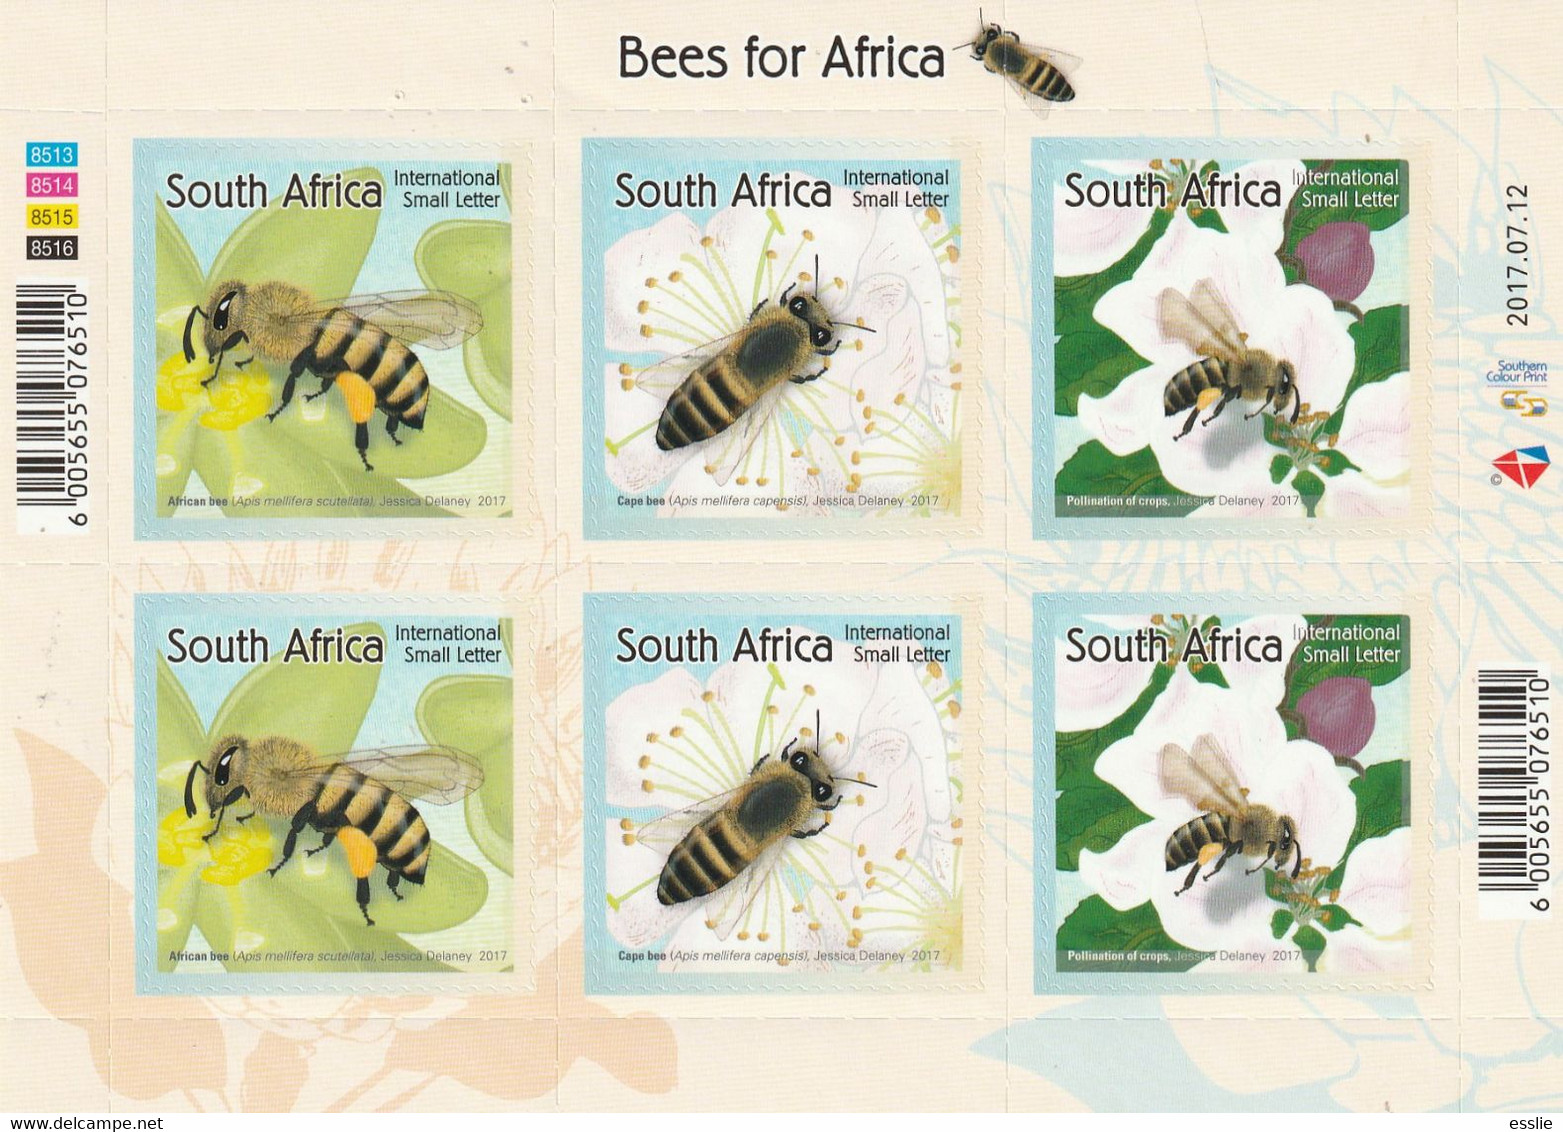 South Africa RSA - 2017 - Bees For Africa Honey Bee - Complete Sheet - Unused Stamps